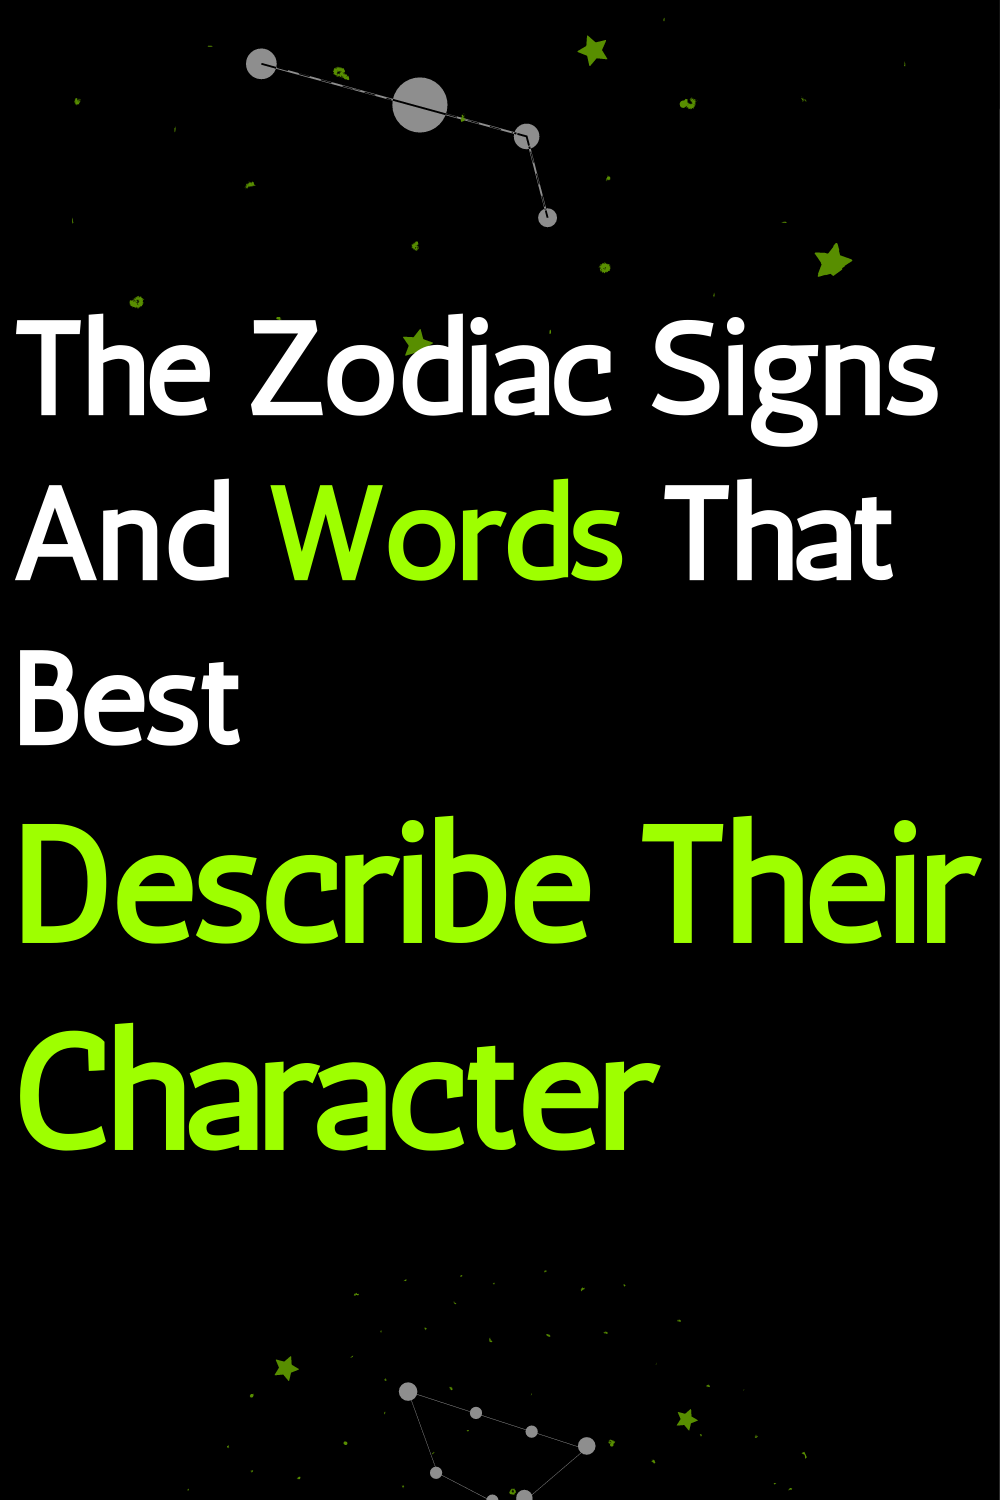 The Zodiac Signs And Words That Best Describe Their Character